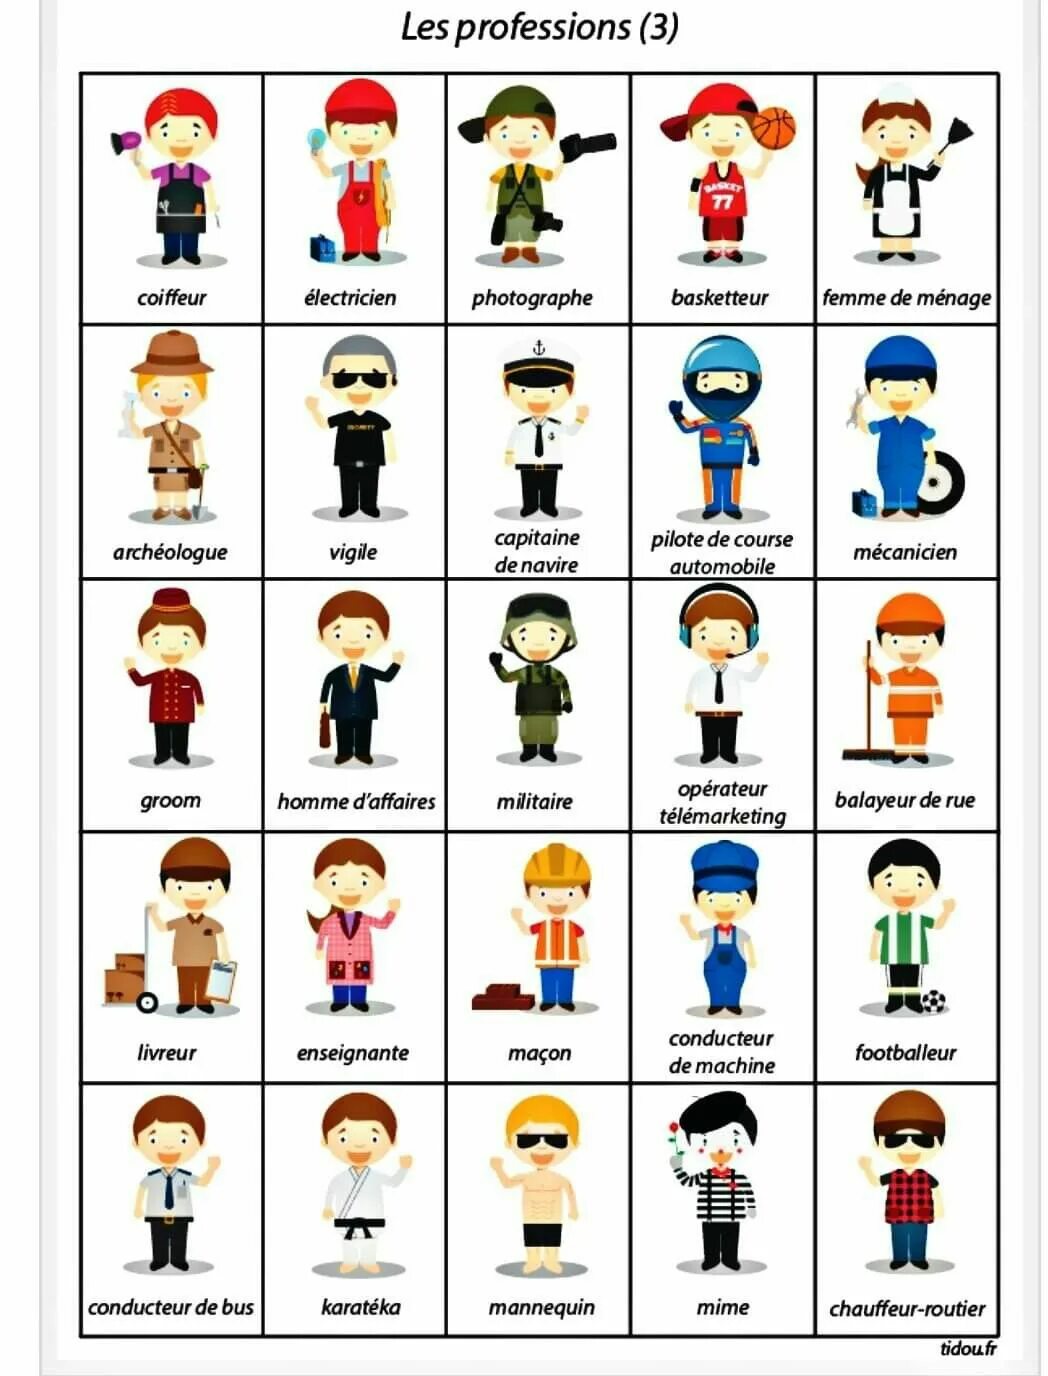 Professions pictures. Professions карточки. Лексика по теме jobs and Professions. Professions for Kids. " Jobs and Professions Flashcards ".